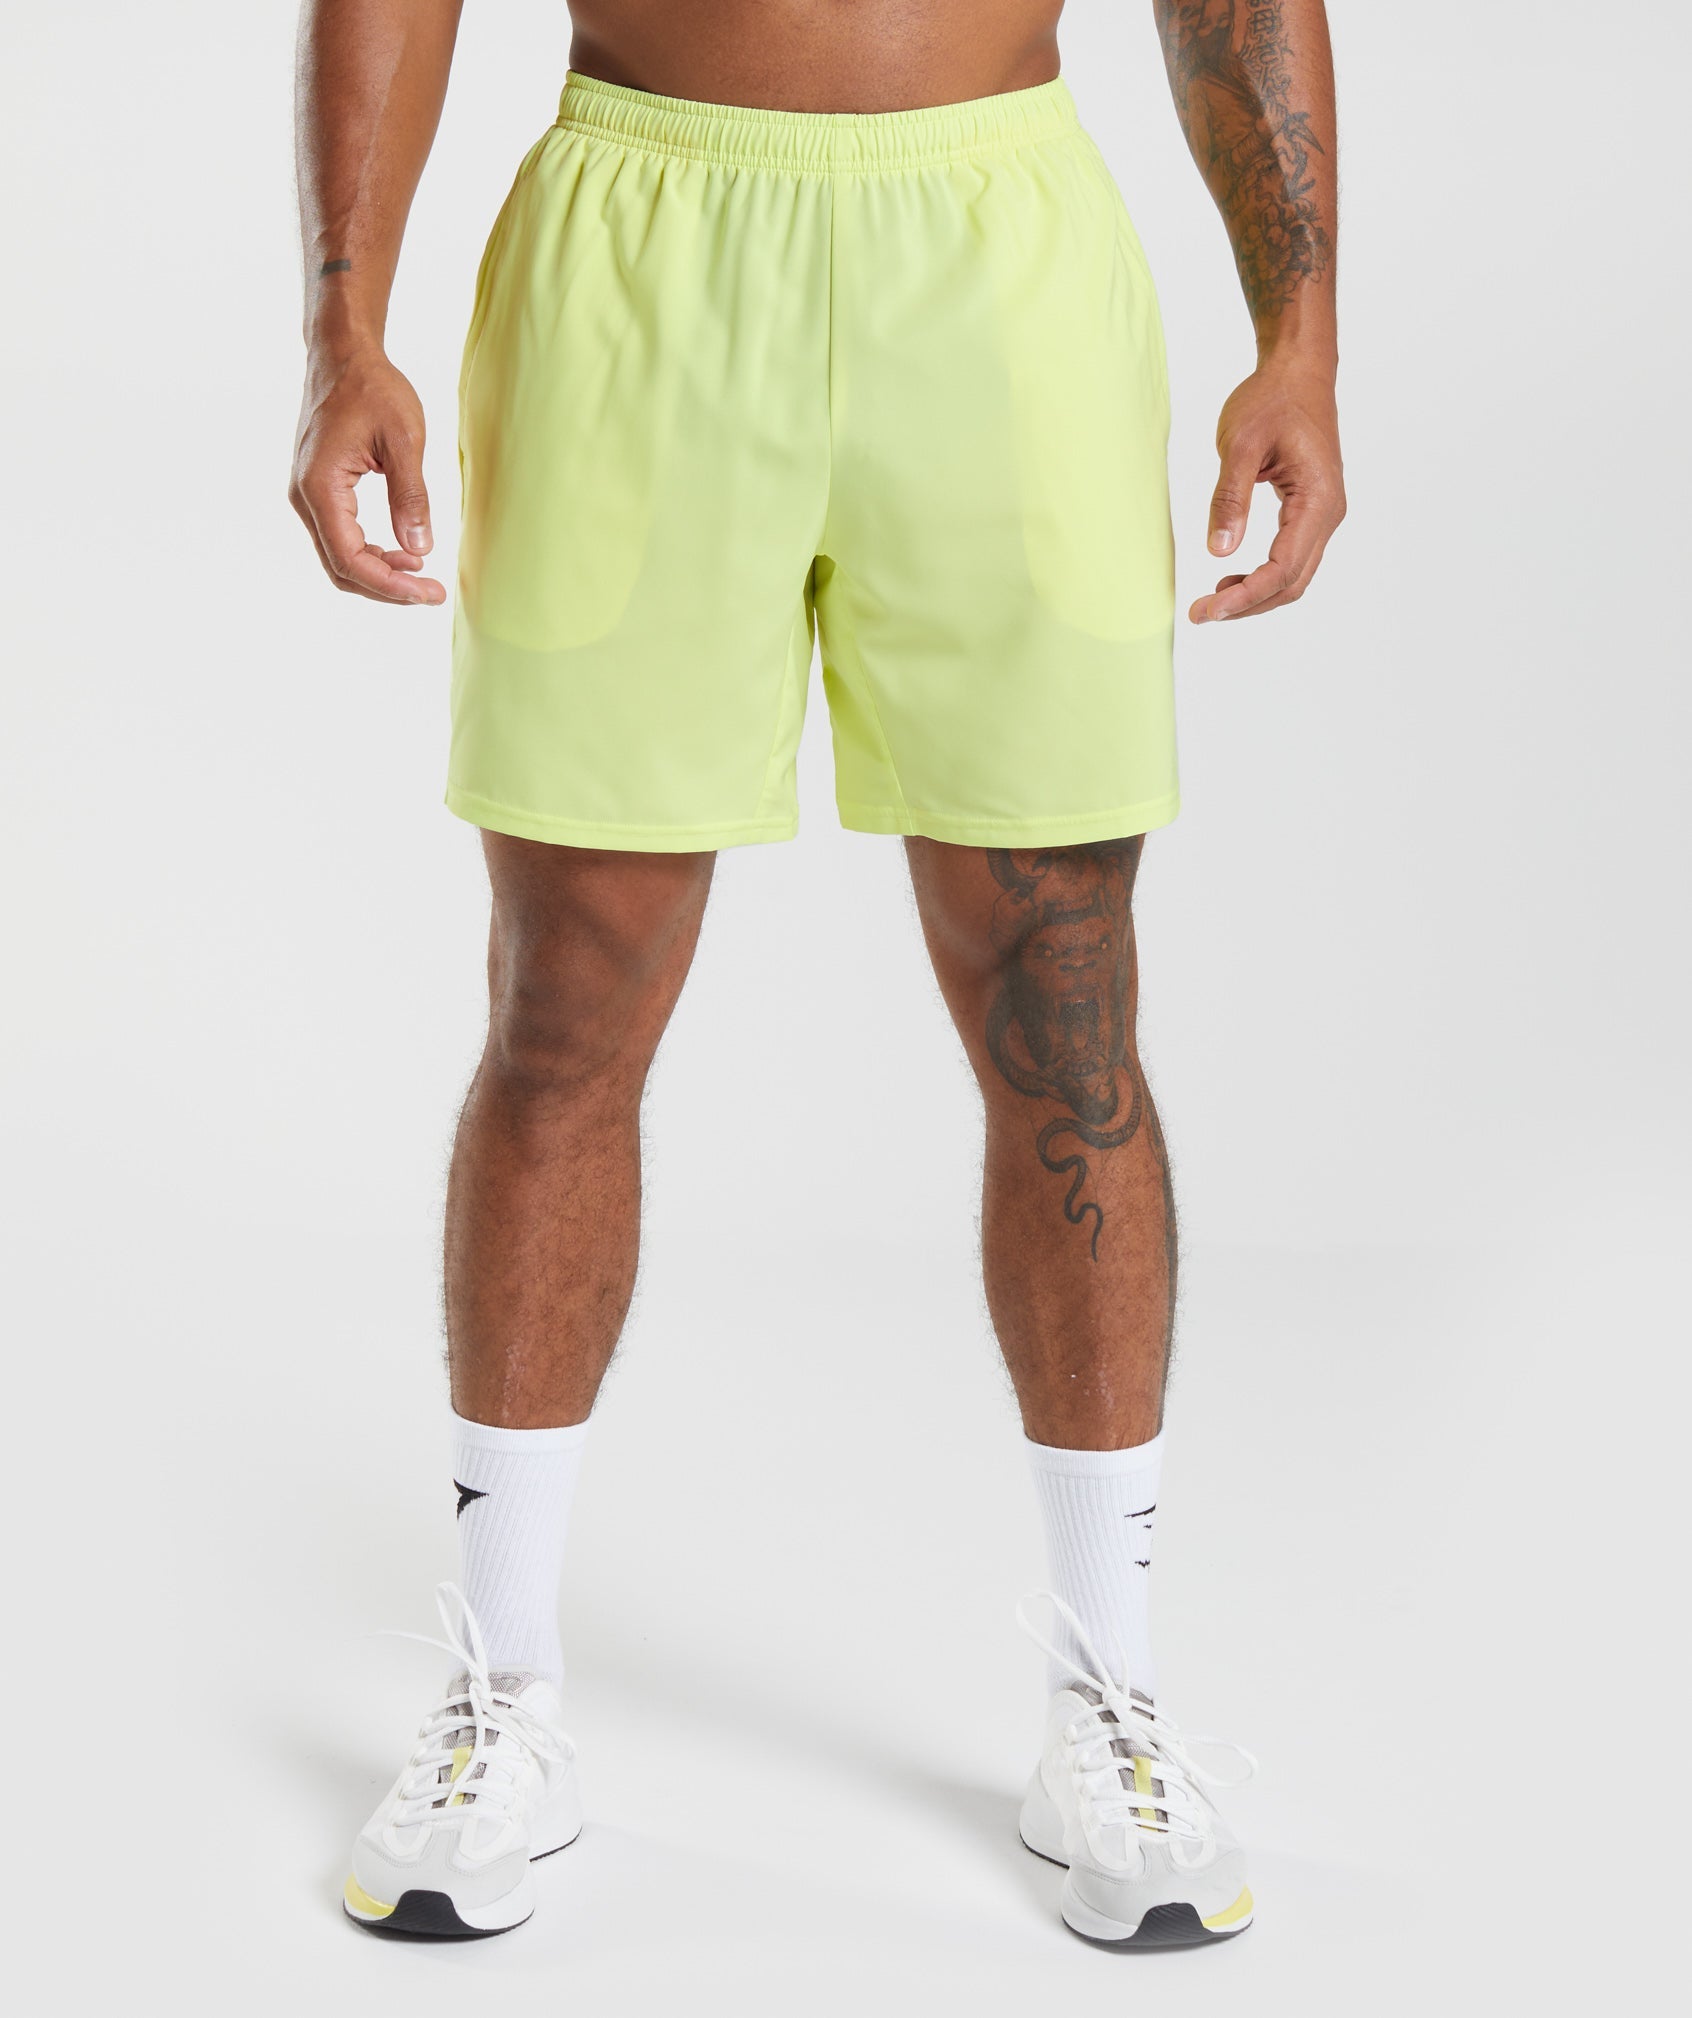 Arrival 7" Shorts in Firefly Green